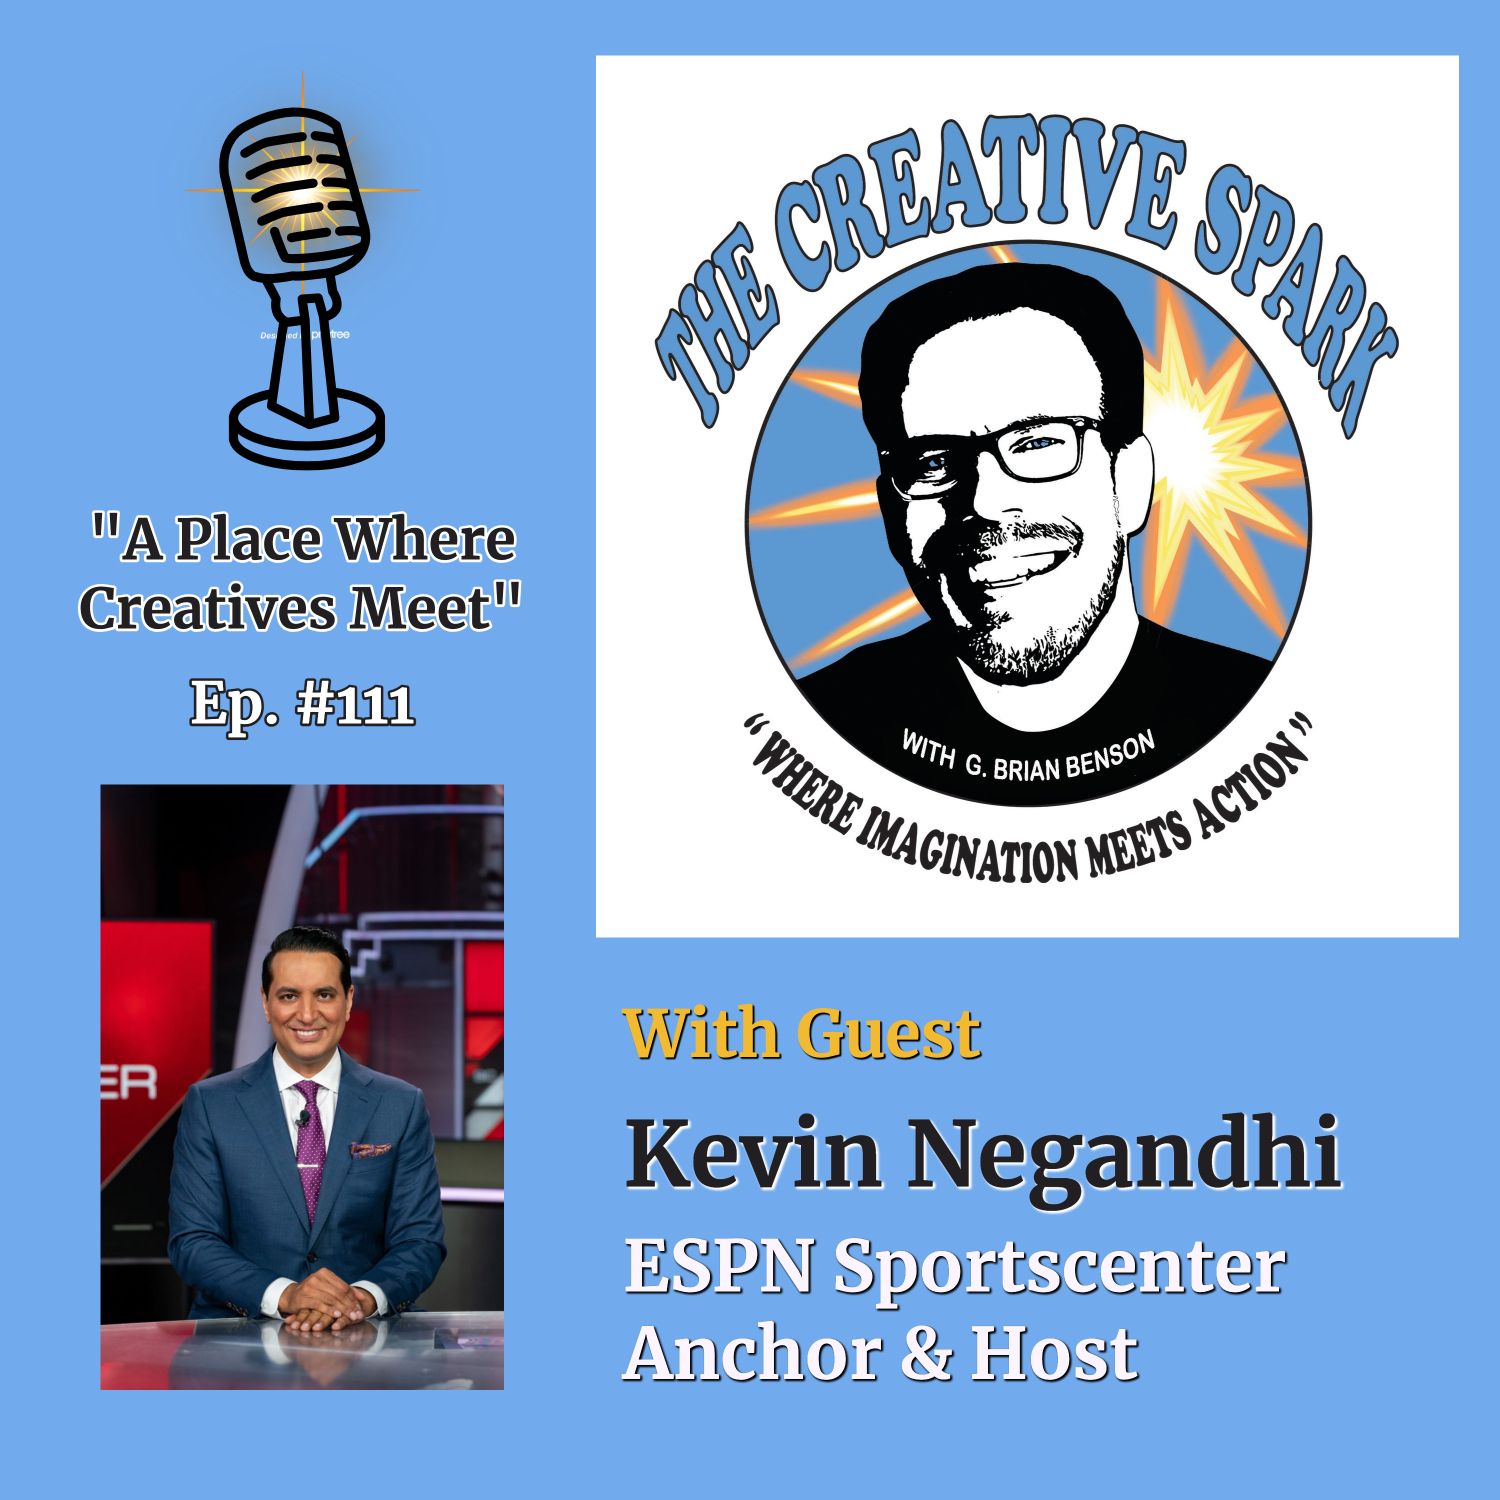 S1 Ep113: The Creative Spark Ep. 113 with Guest Kevin Negandhi